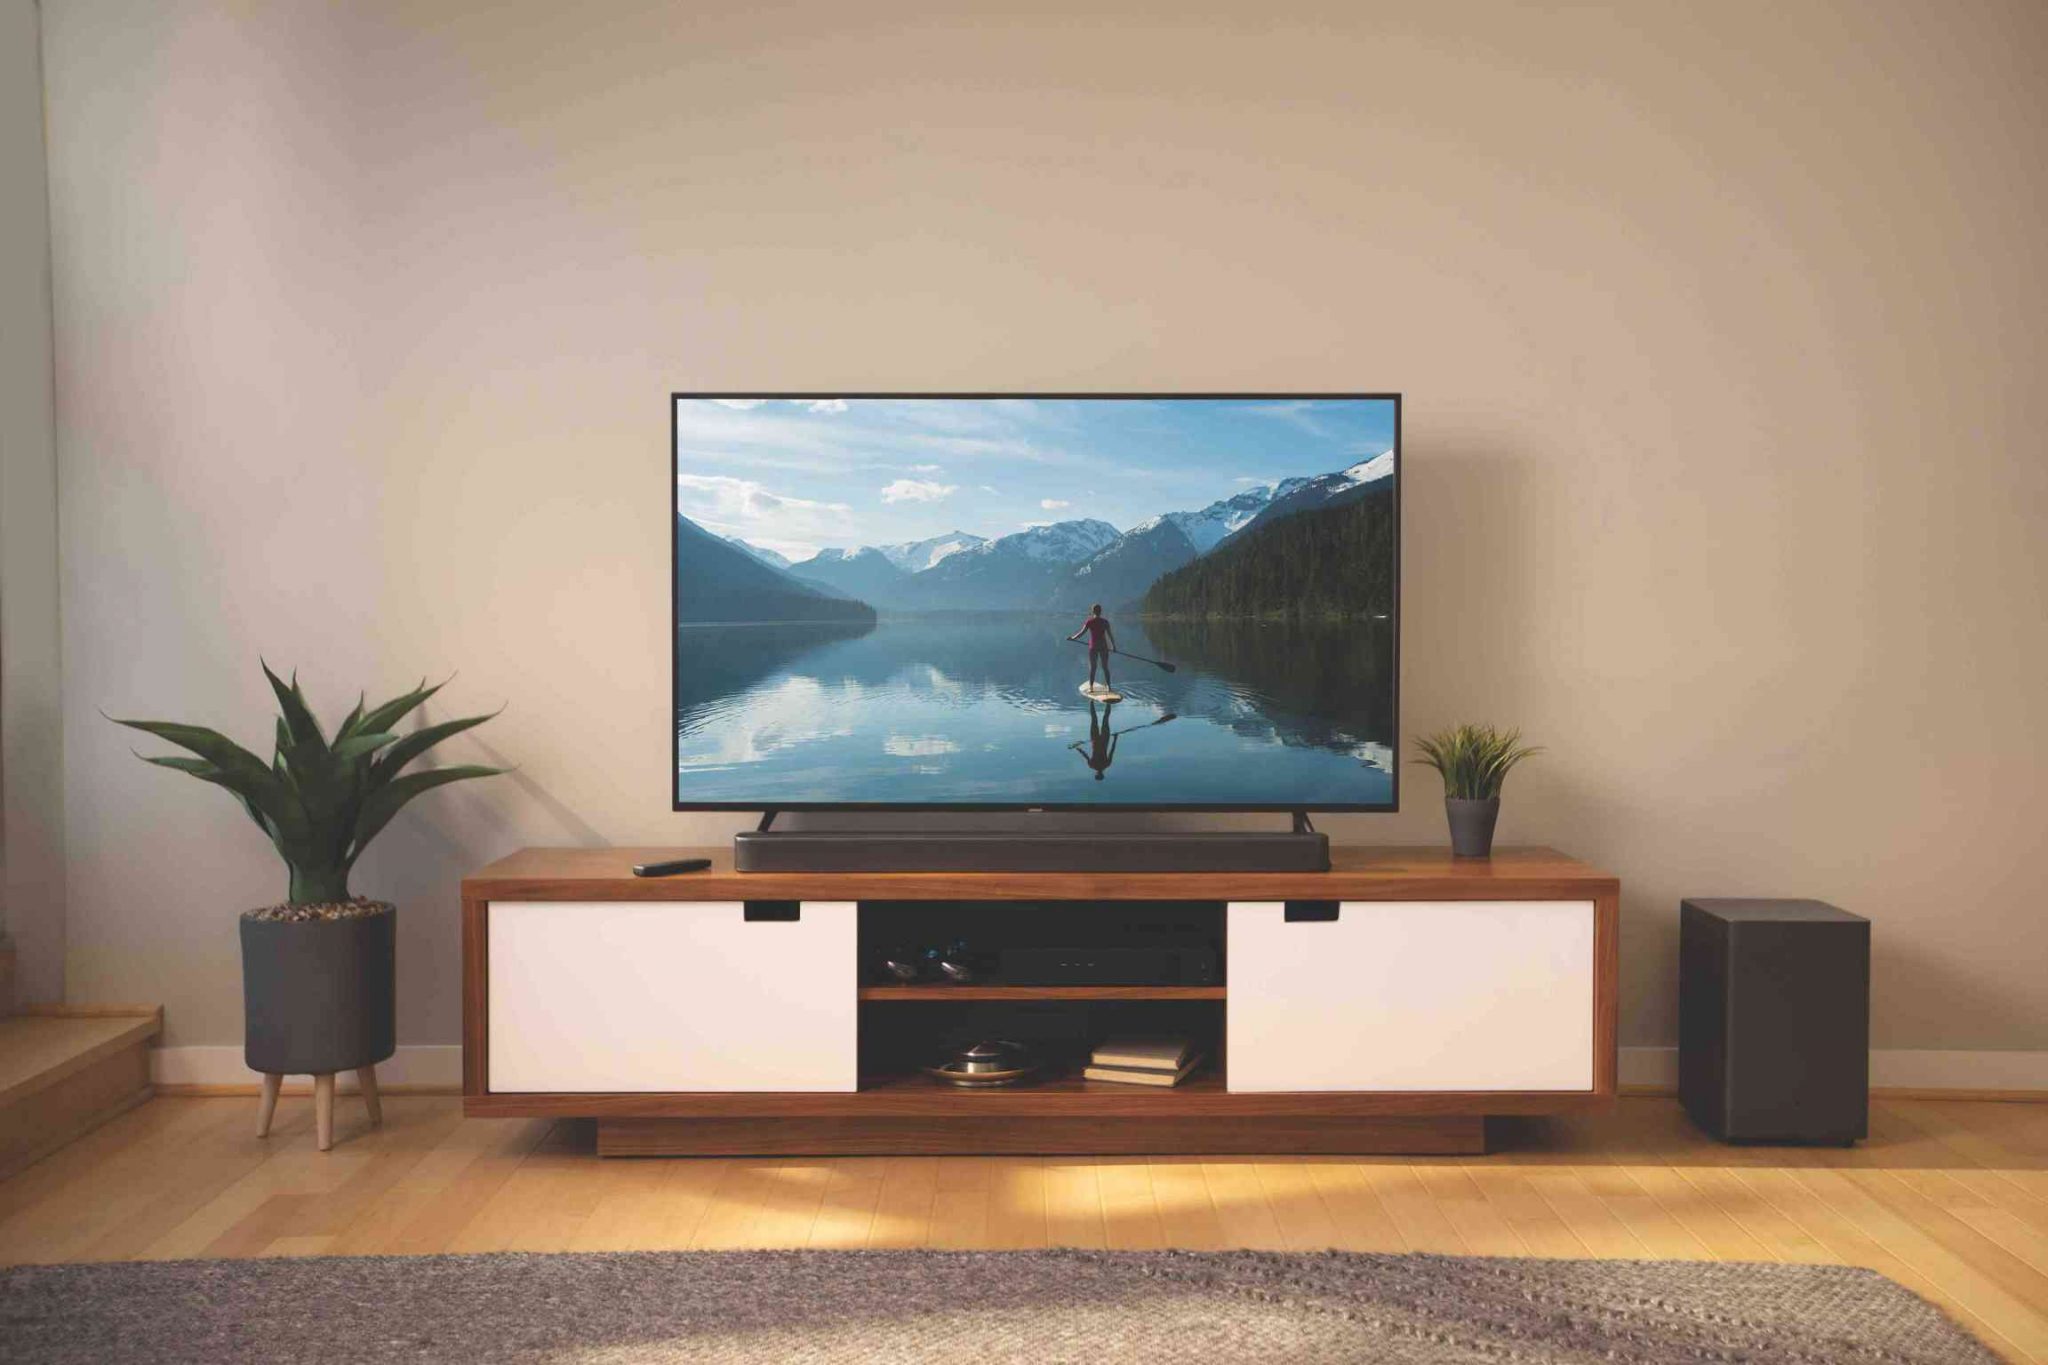 tv and soundbar out of sync